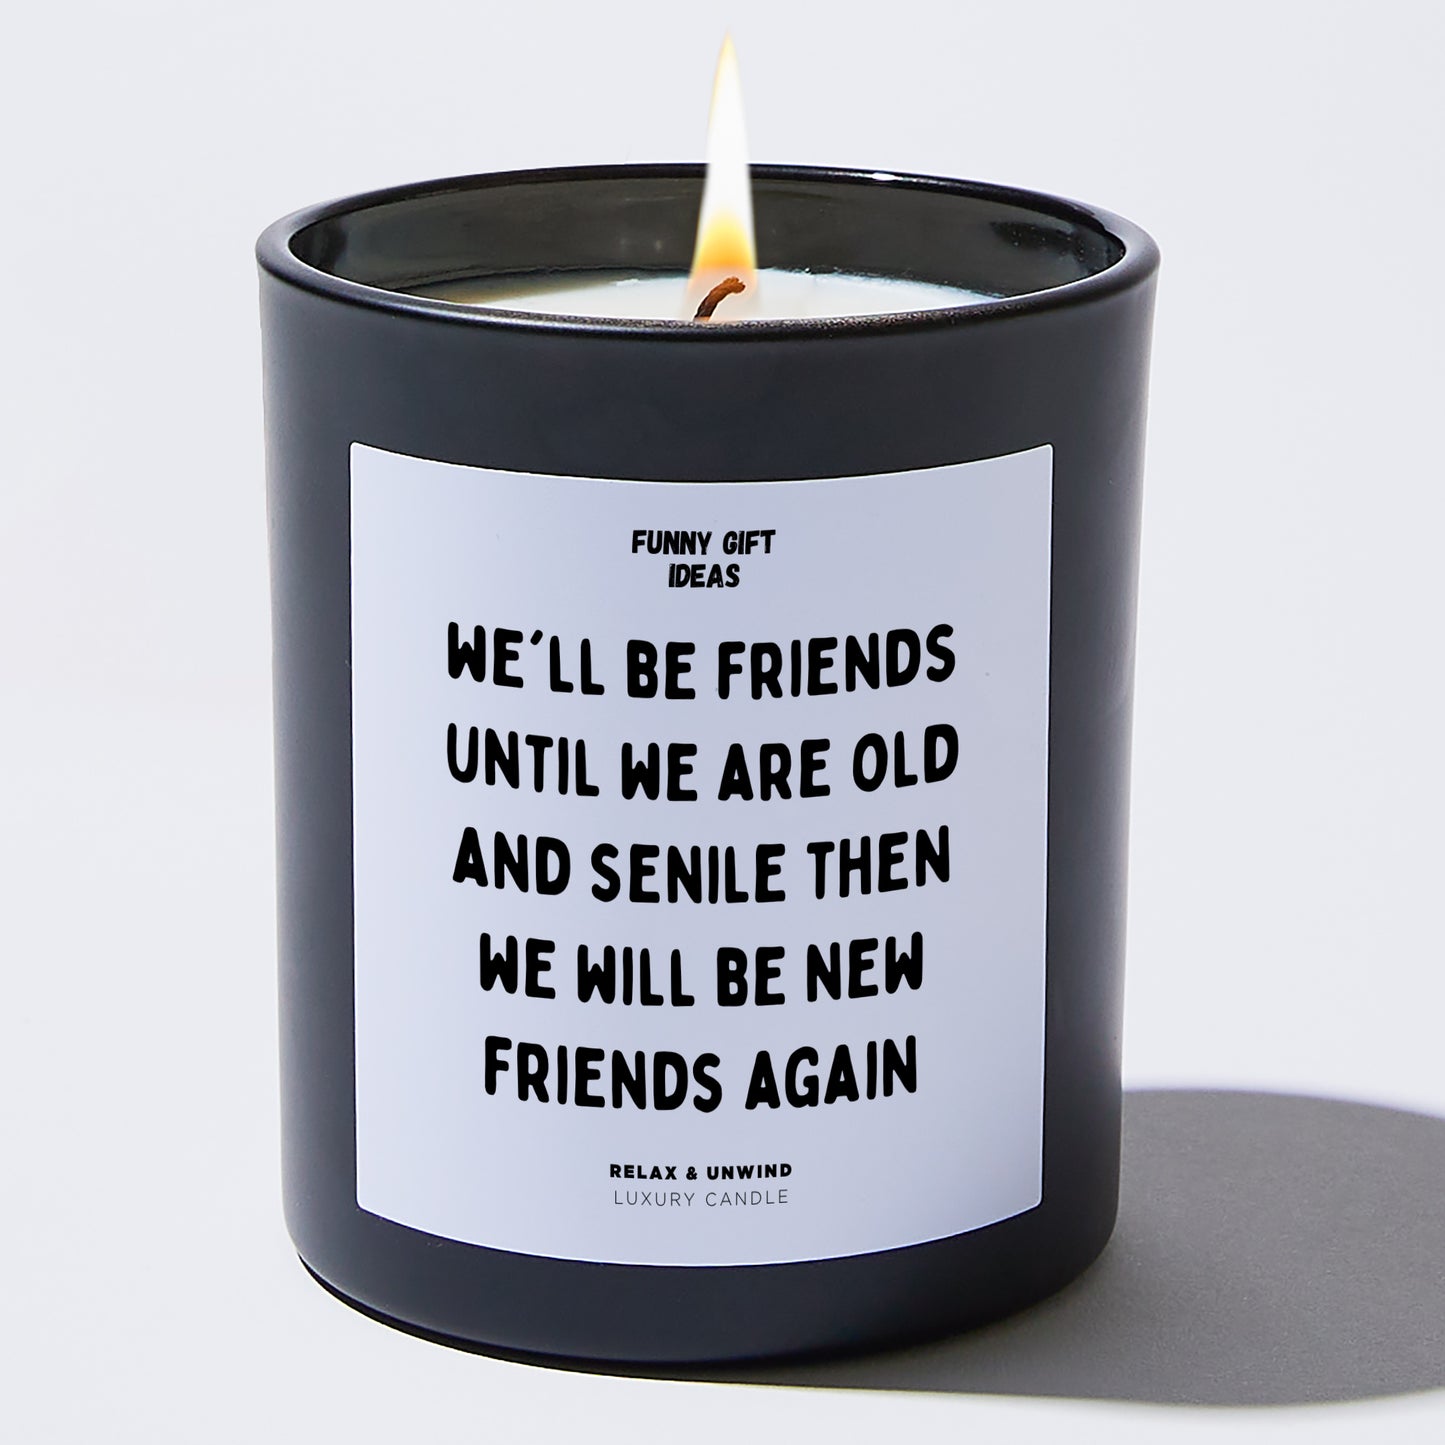 Fun Gift for Friends We'll Be Friends Until We Are Old And Senile Then We Will Be New Friends Again - Funny Gift Ideas